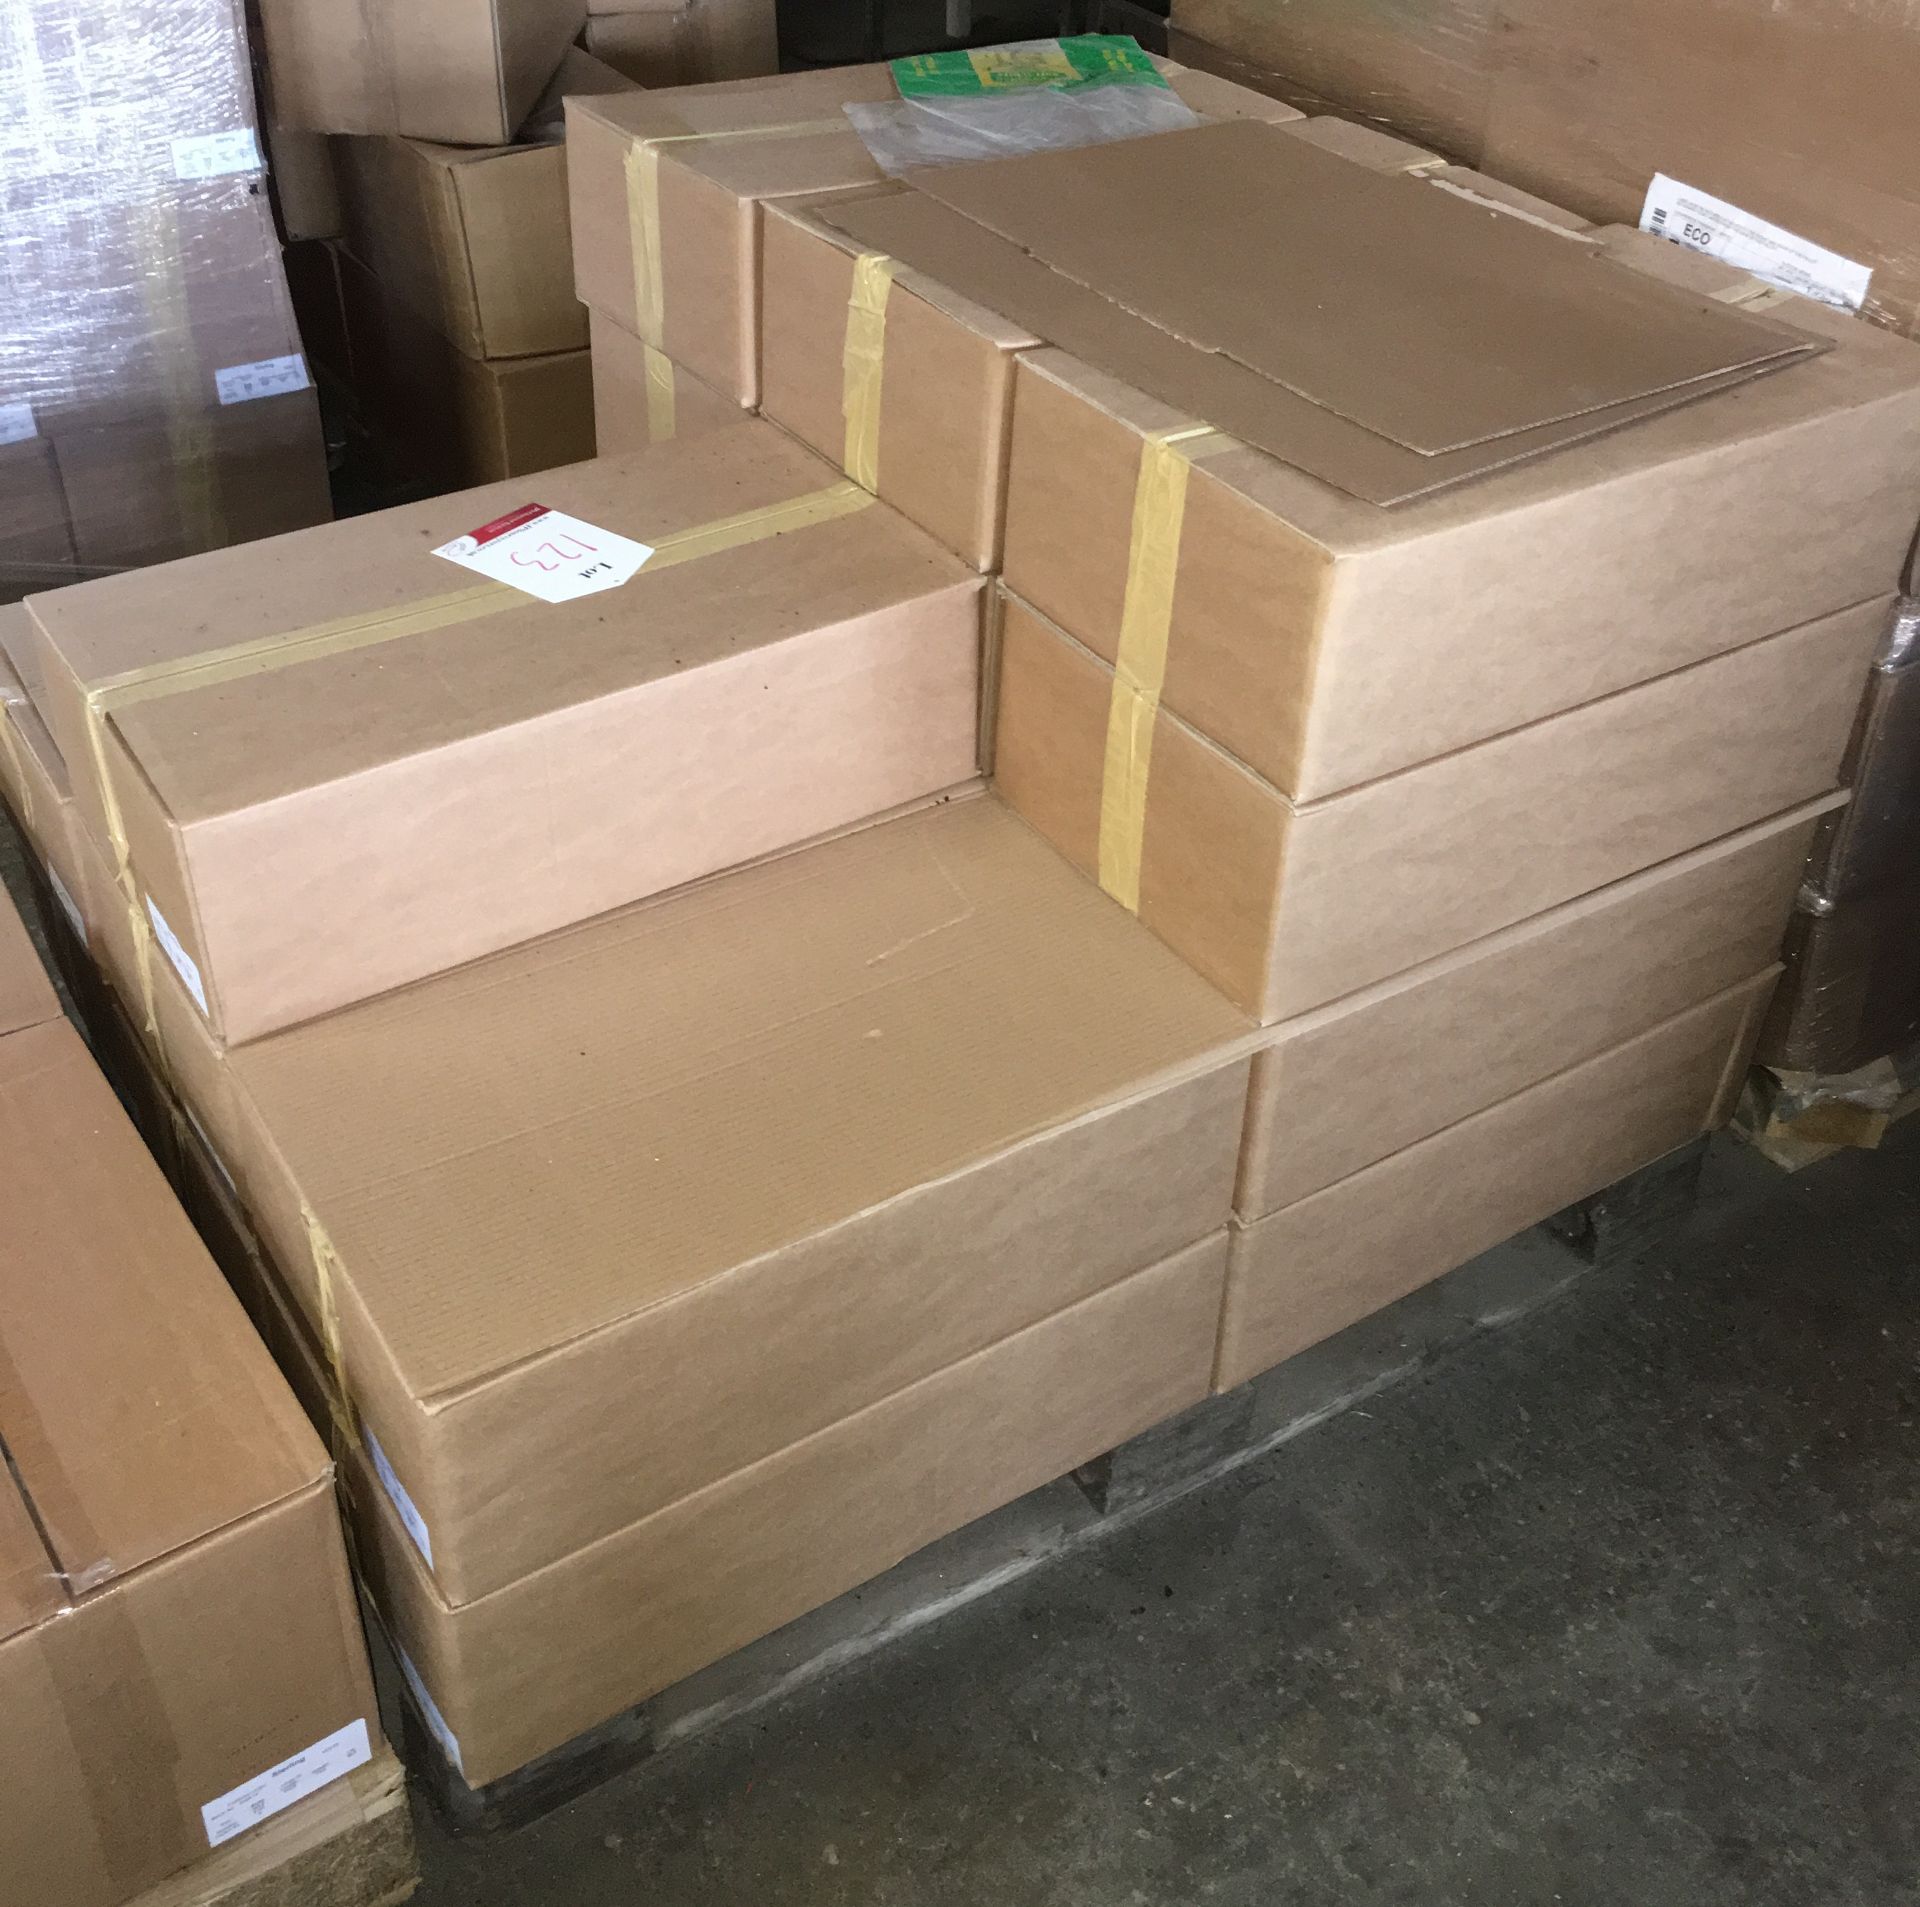 25 x Boxes of Sterling Plastic Packaging Bags